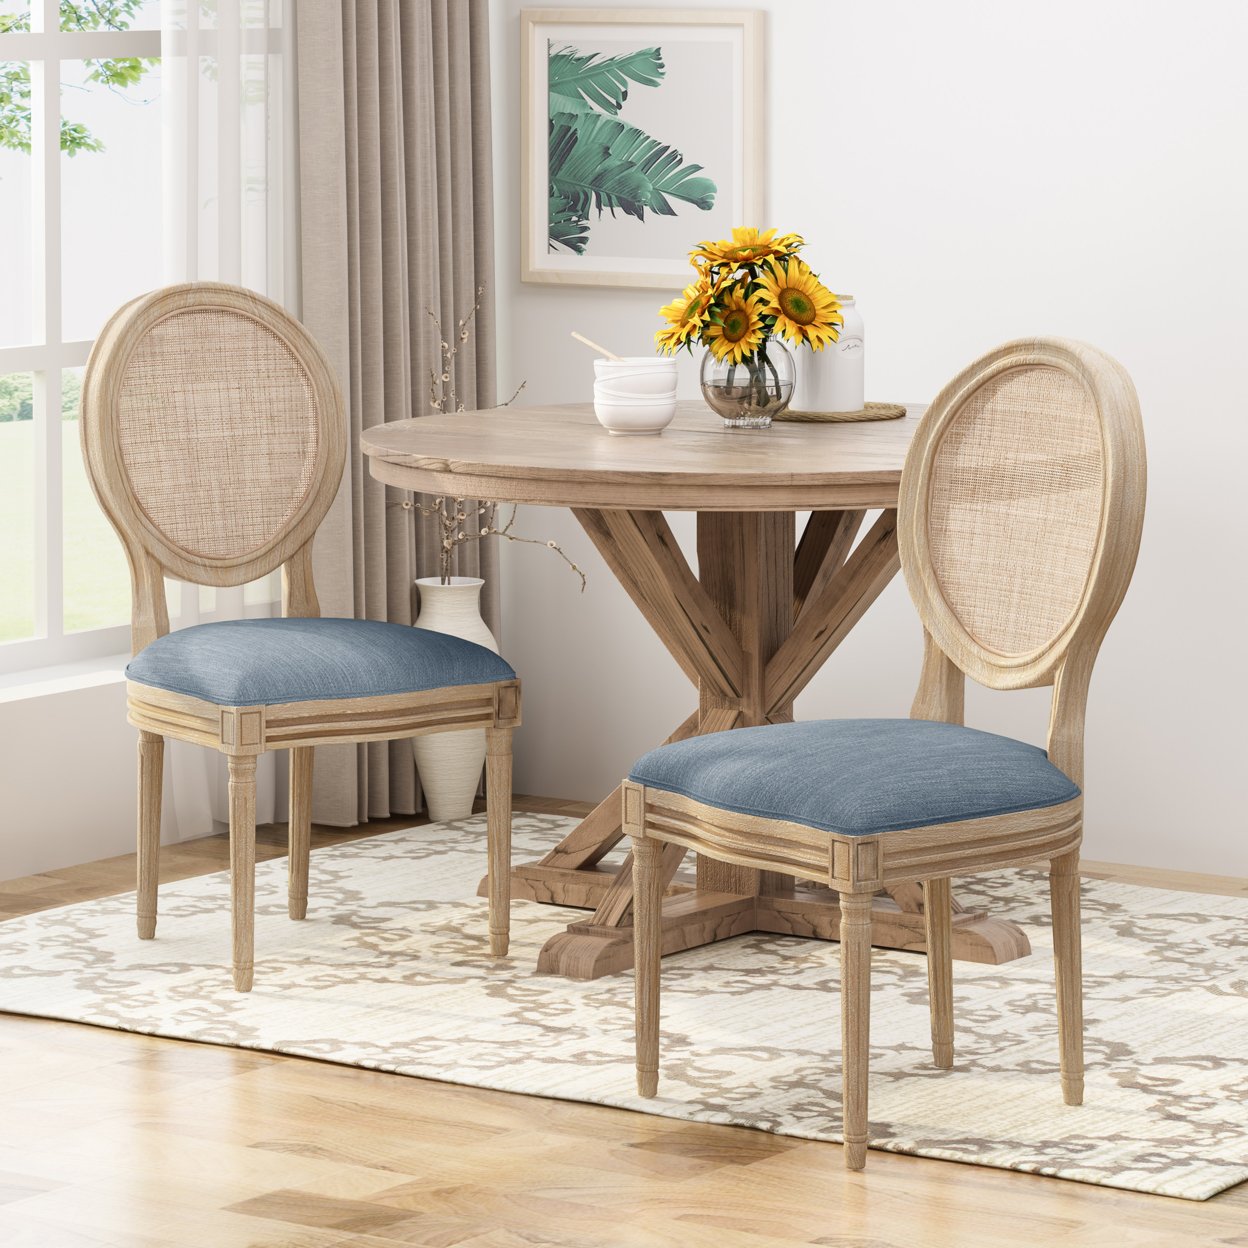 Camilo Wooden Dining Chair With Wicker And Fabric Seating (Set Of 2) - Light Blue + Natural